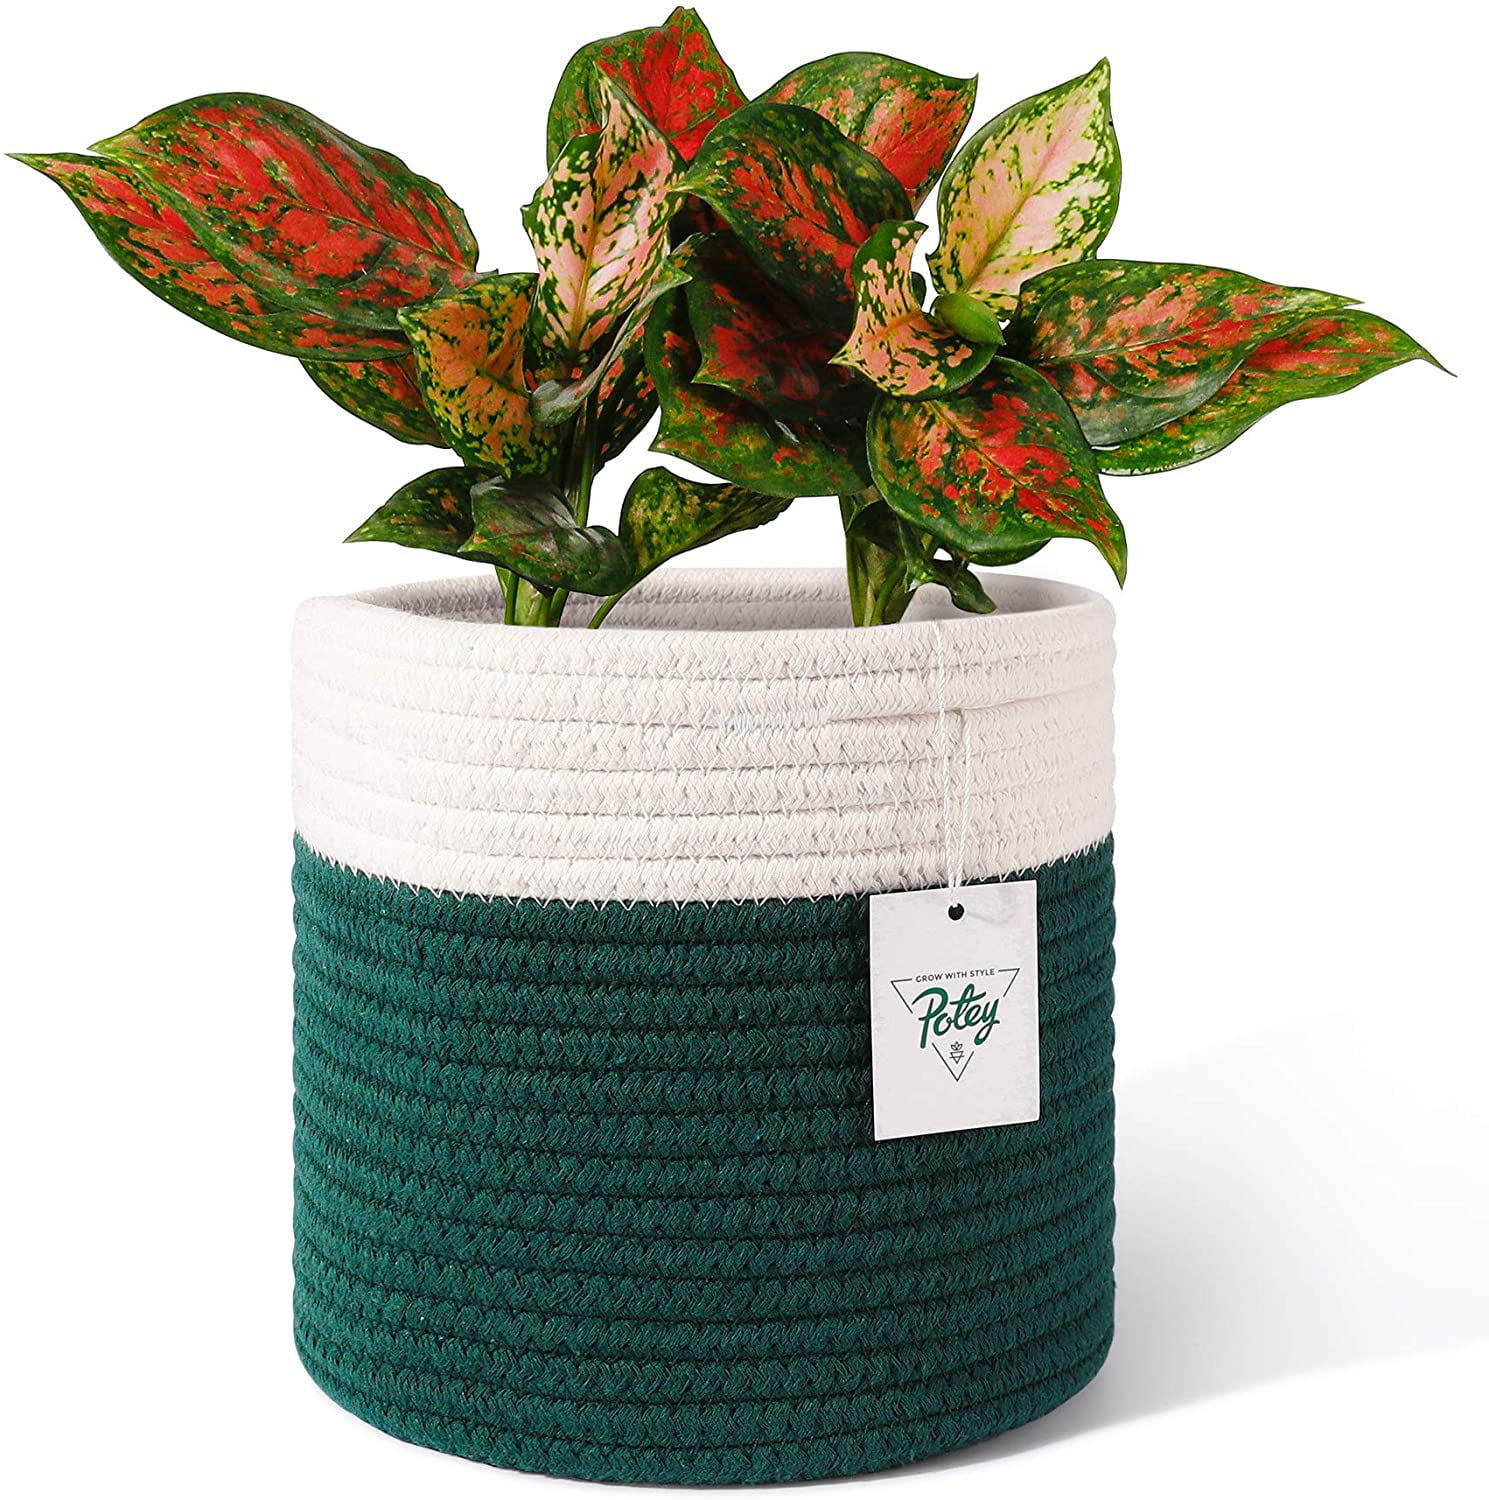 POTEY 8x7.5 Basket Planters for Indoor Plants Sturdy Woven Rope Organizer with Handle White Dark Green Stripes Small up to 7.5 Inch Flower Pot 